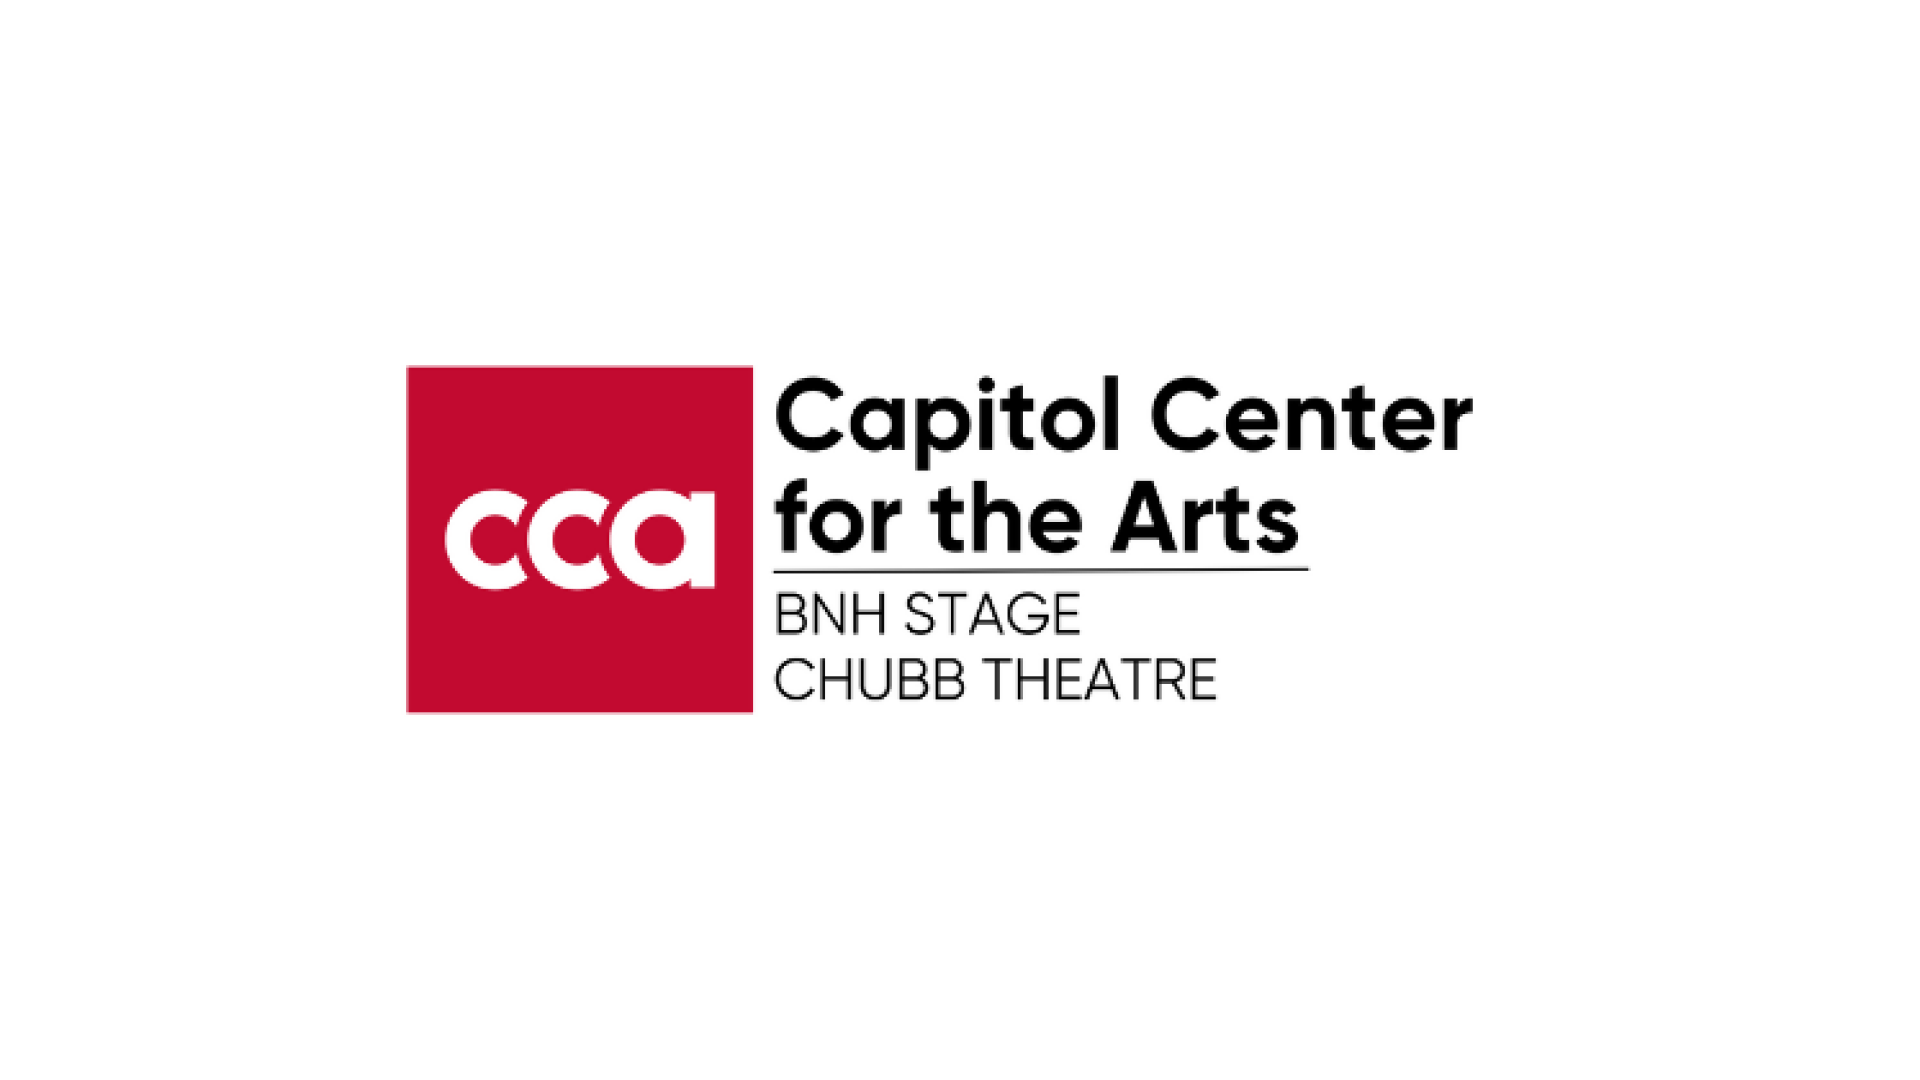 Capitol Center for the Arts logo